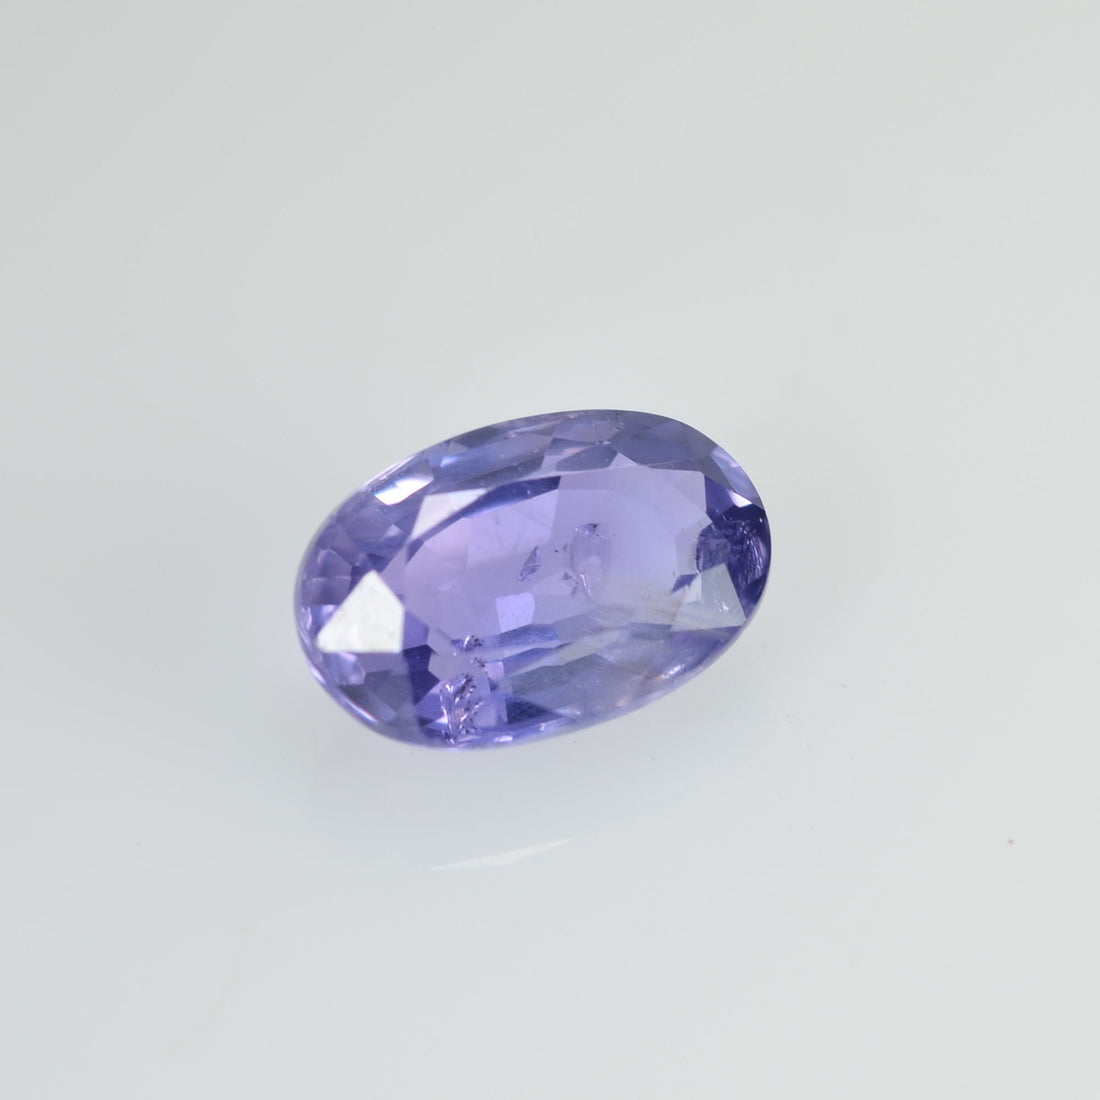 0.61 cts Natural Lavender Sapphire Loose Gemstone Oval Cut